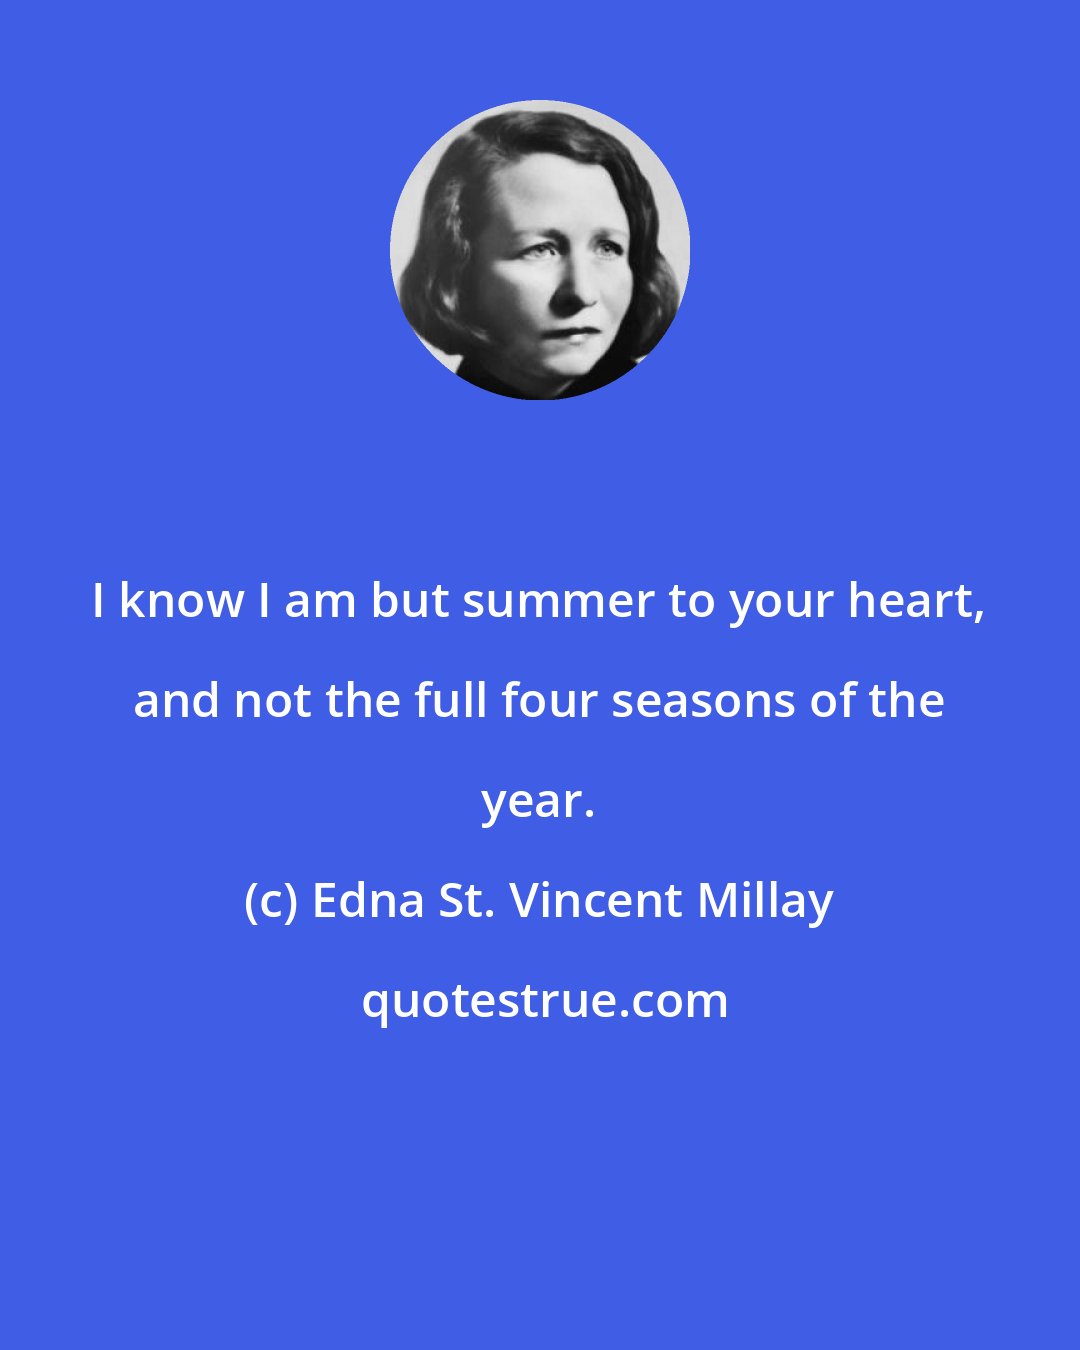 Edna St. Vincent Millay: I know I am but summer to your heart, and not the full four seasons of the year.